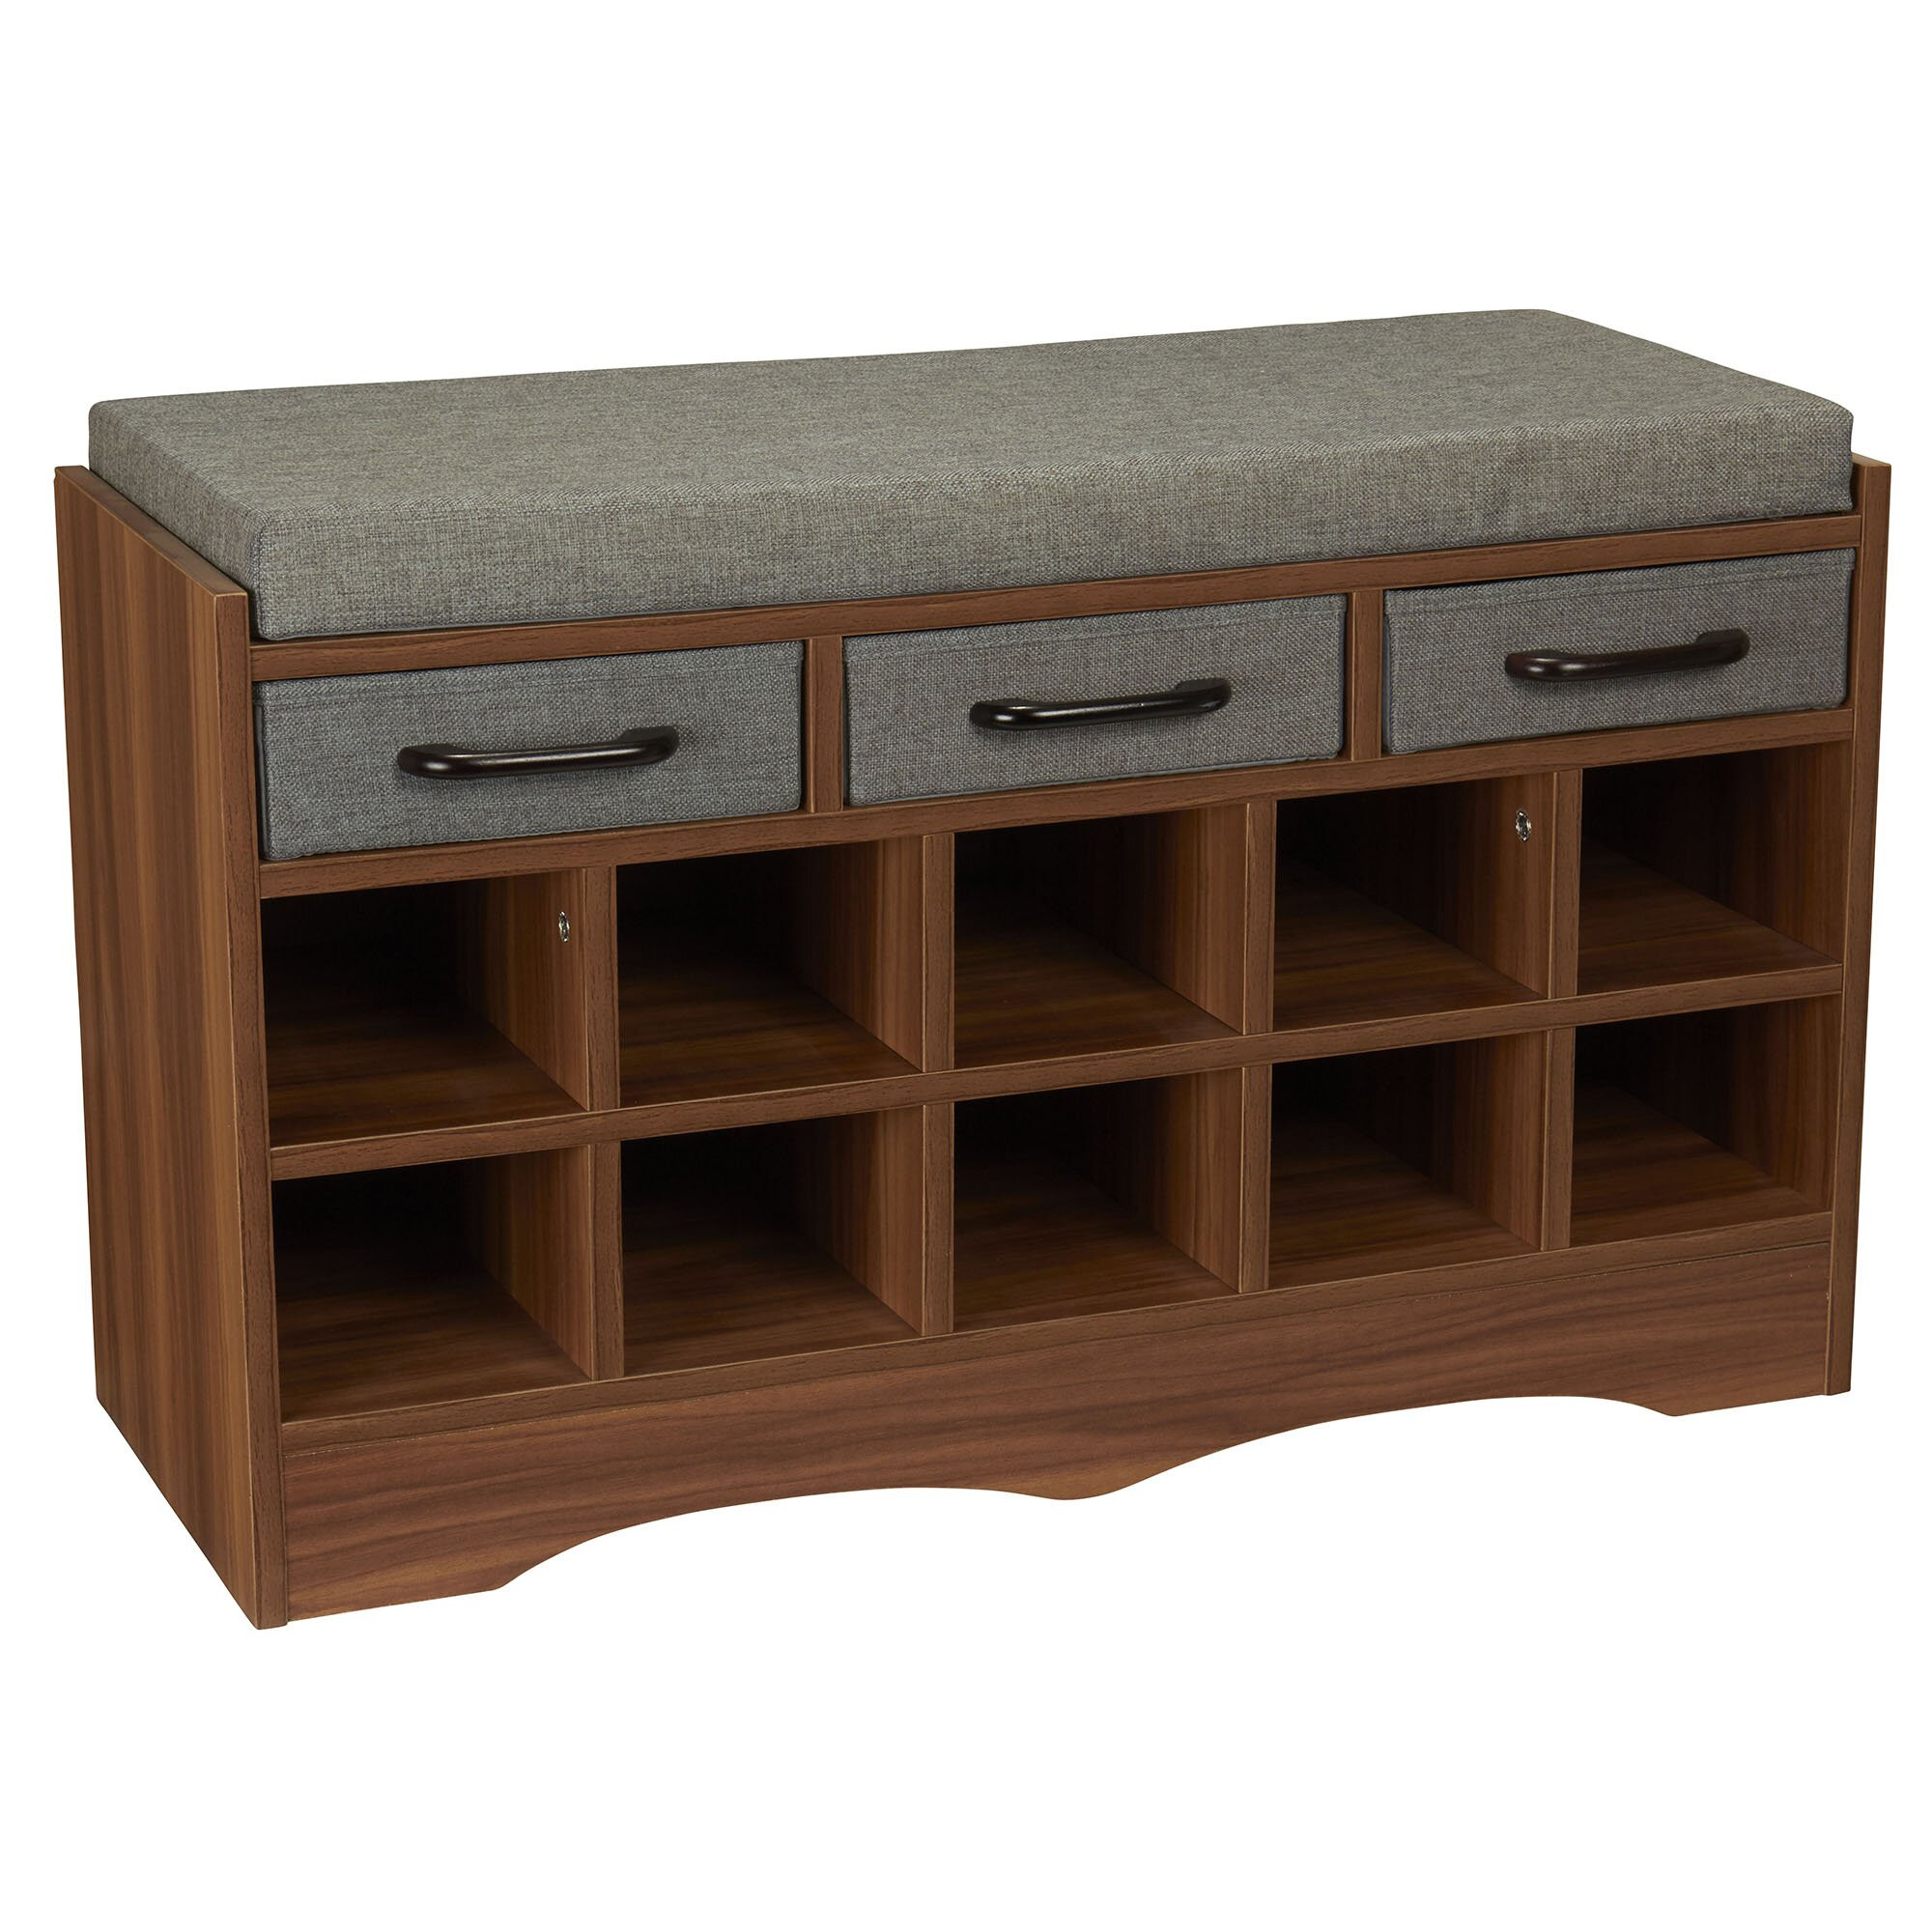 Entry Bench With Storage
 Household Essentials Entryway Shoe Storage Bench & Reviews